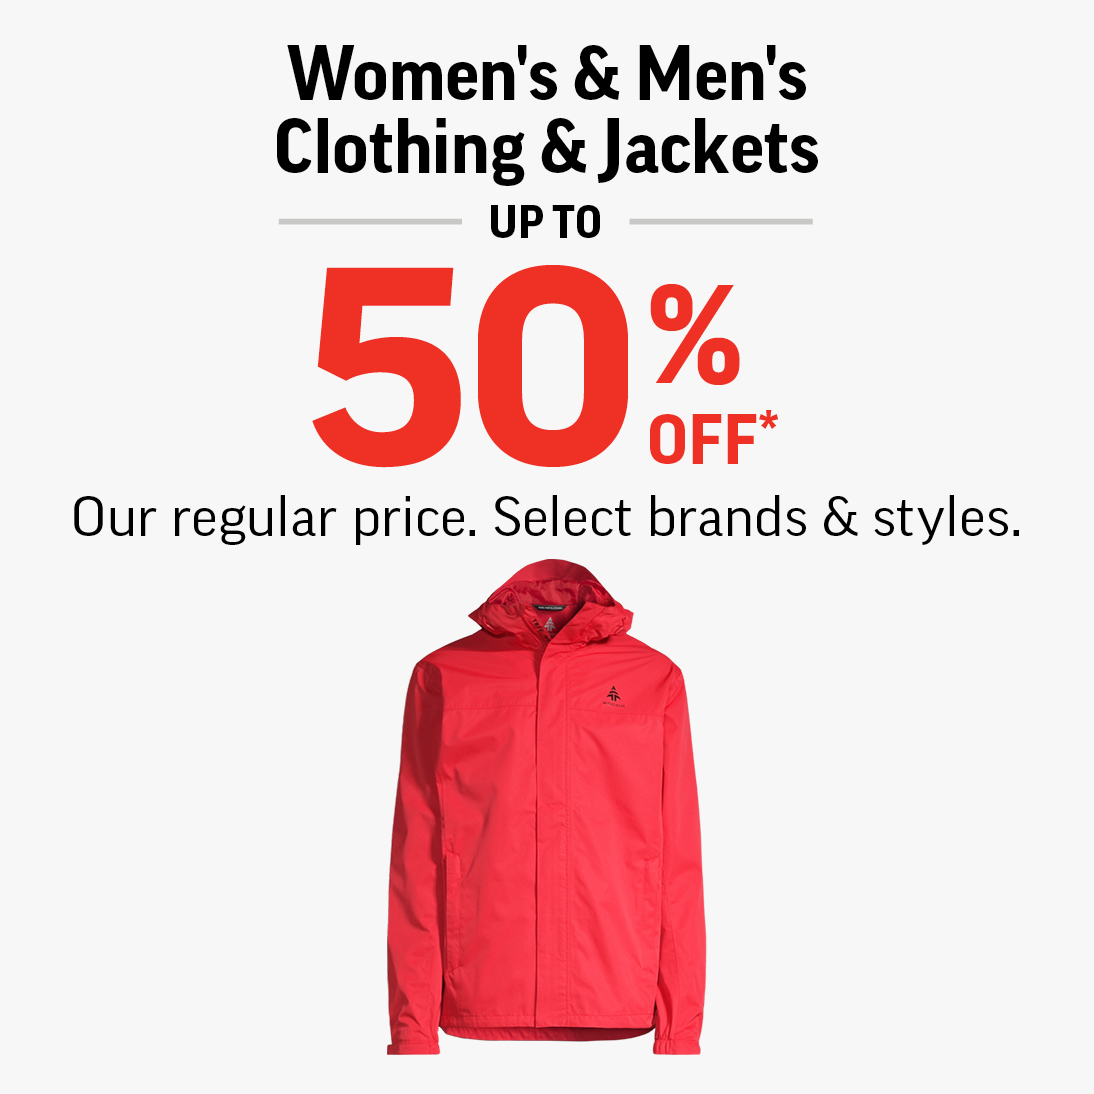 Offer title Clothing & Jackets Up To 50% Off!